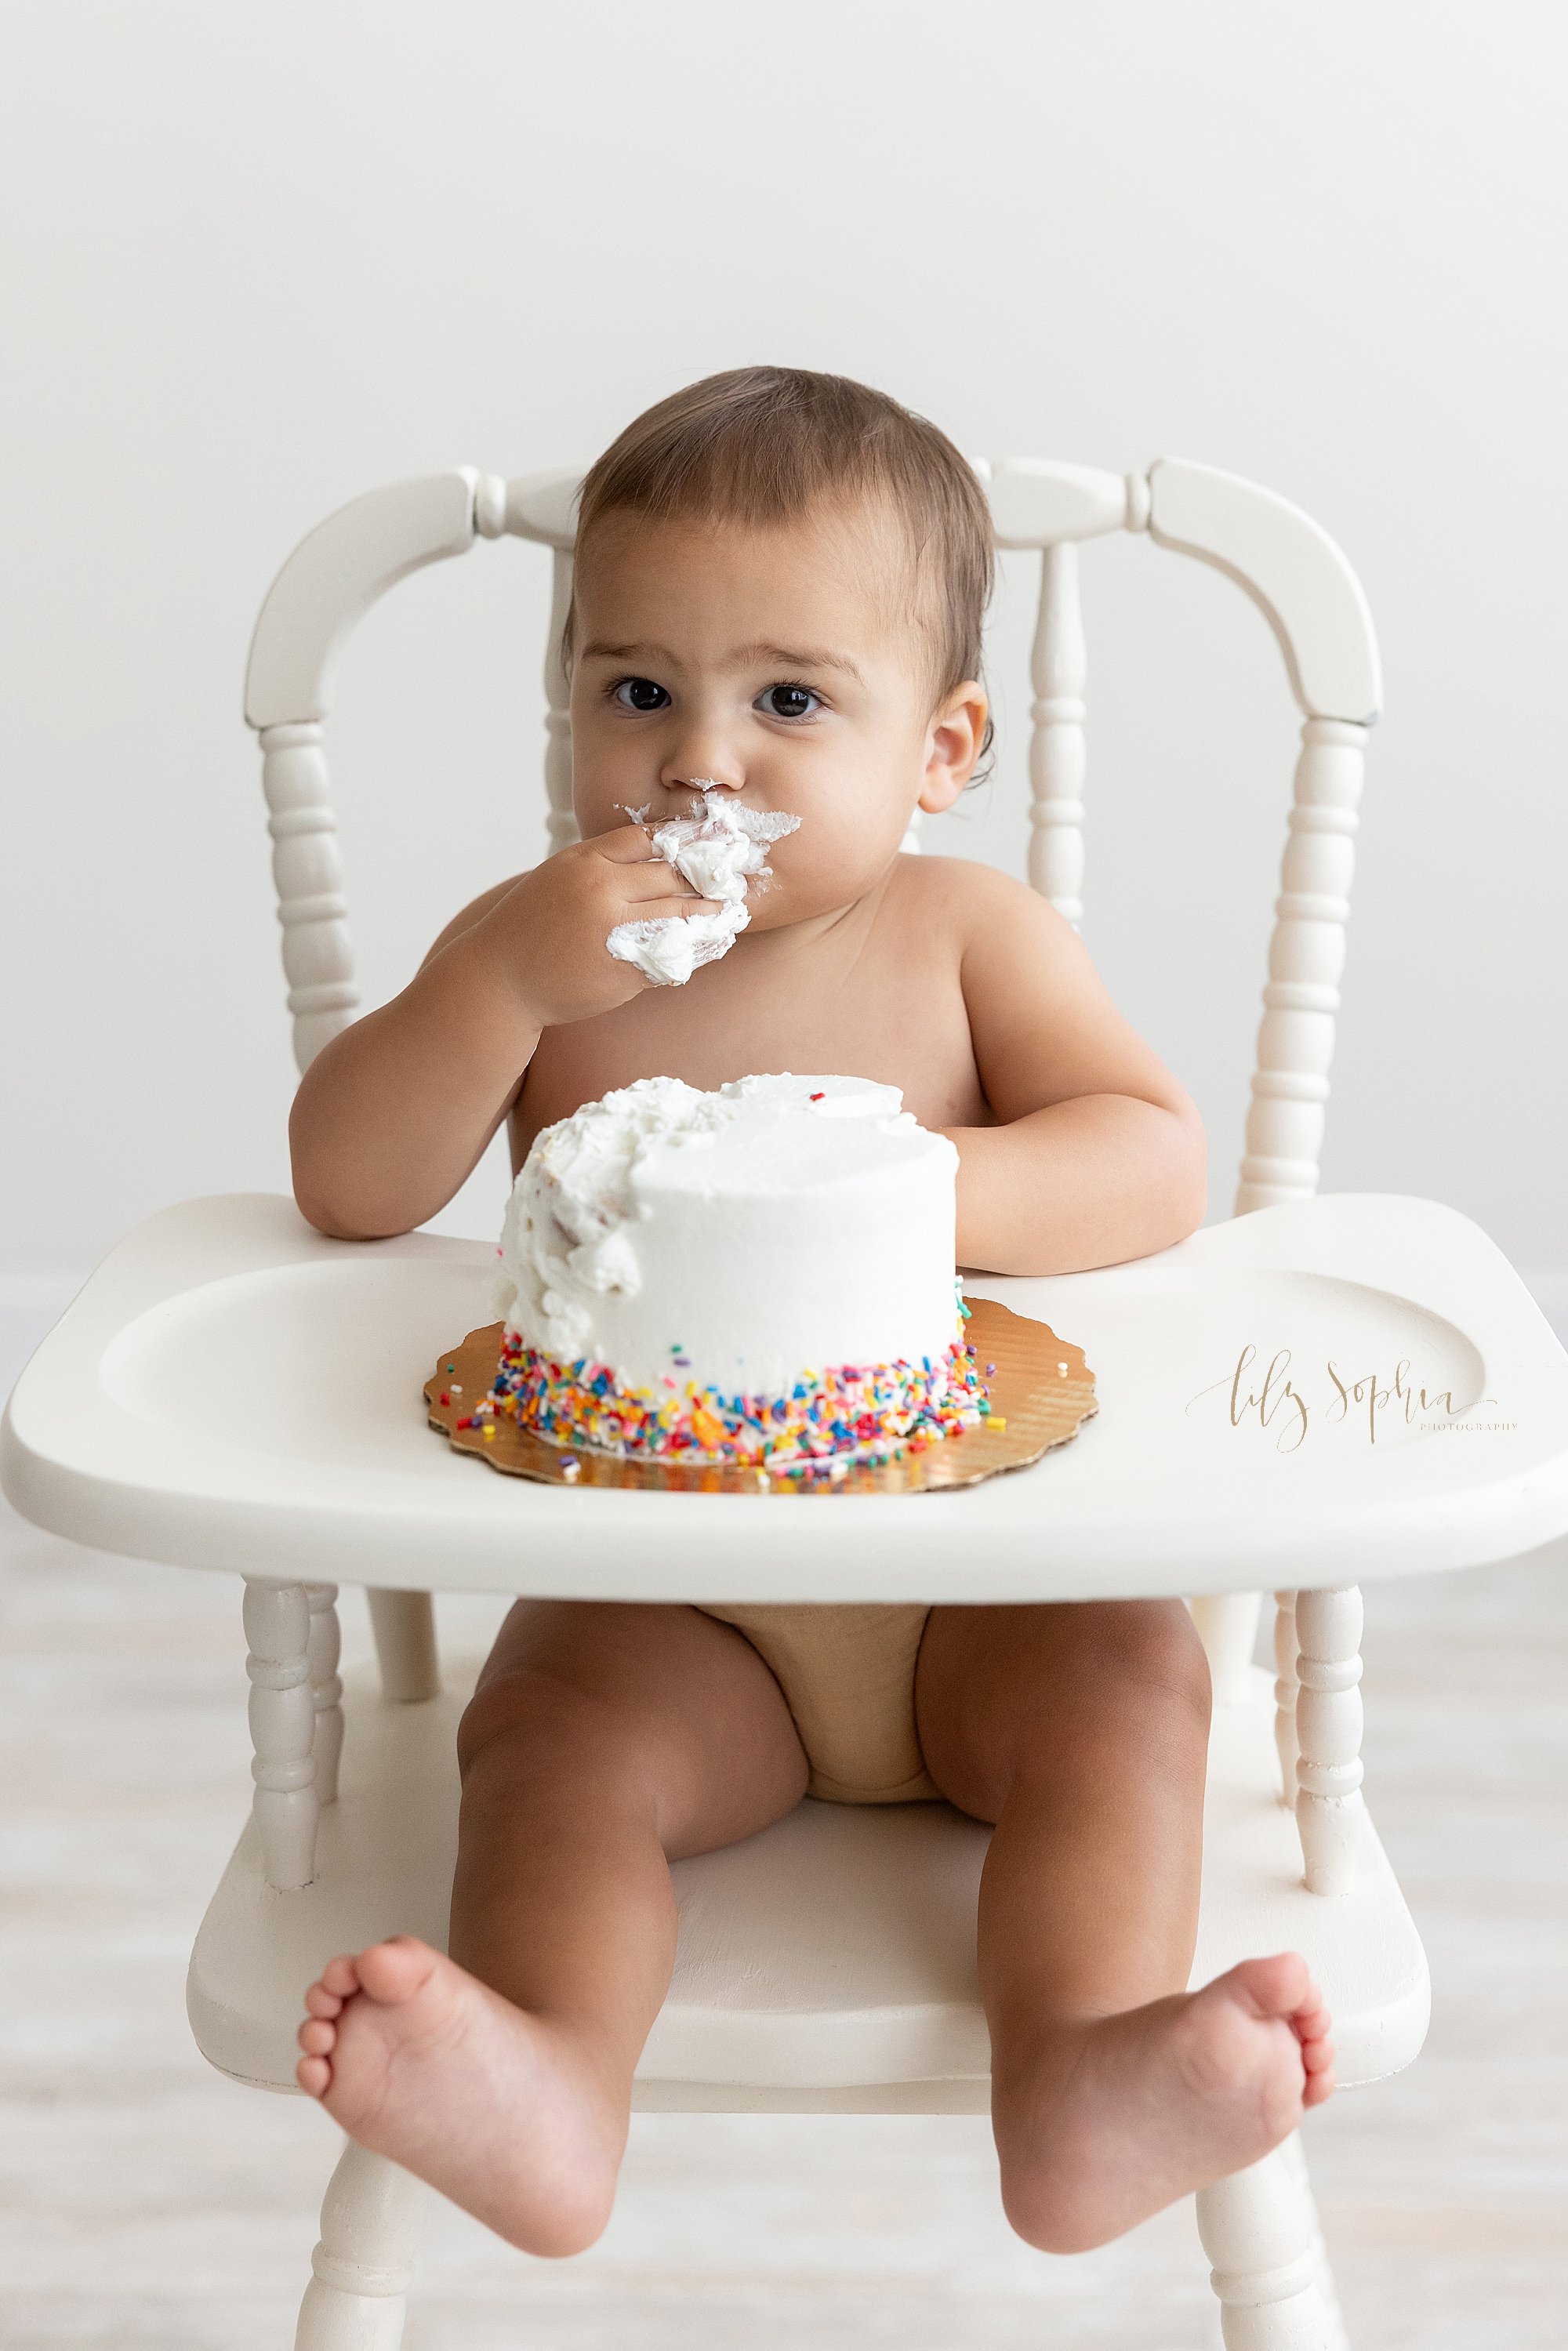  First birthday smash cake photo session of a one year old baby boy as he sits in an antique high chair shoving icing into his mouth taken next to a window streaming natural light into a photography studio near Midtown in Atlanta. 